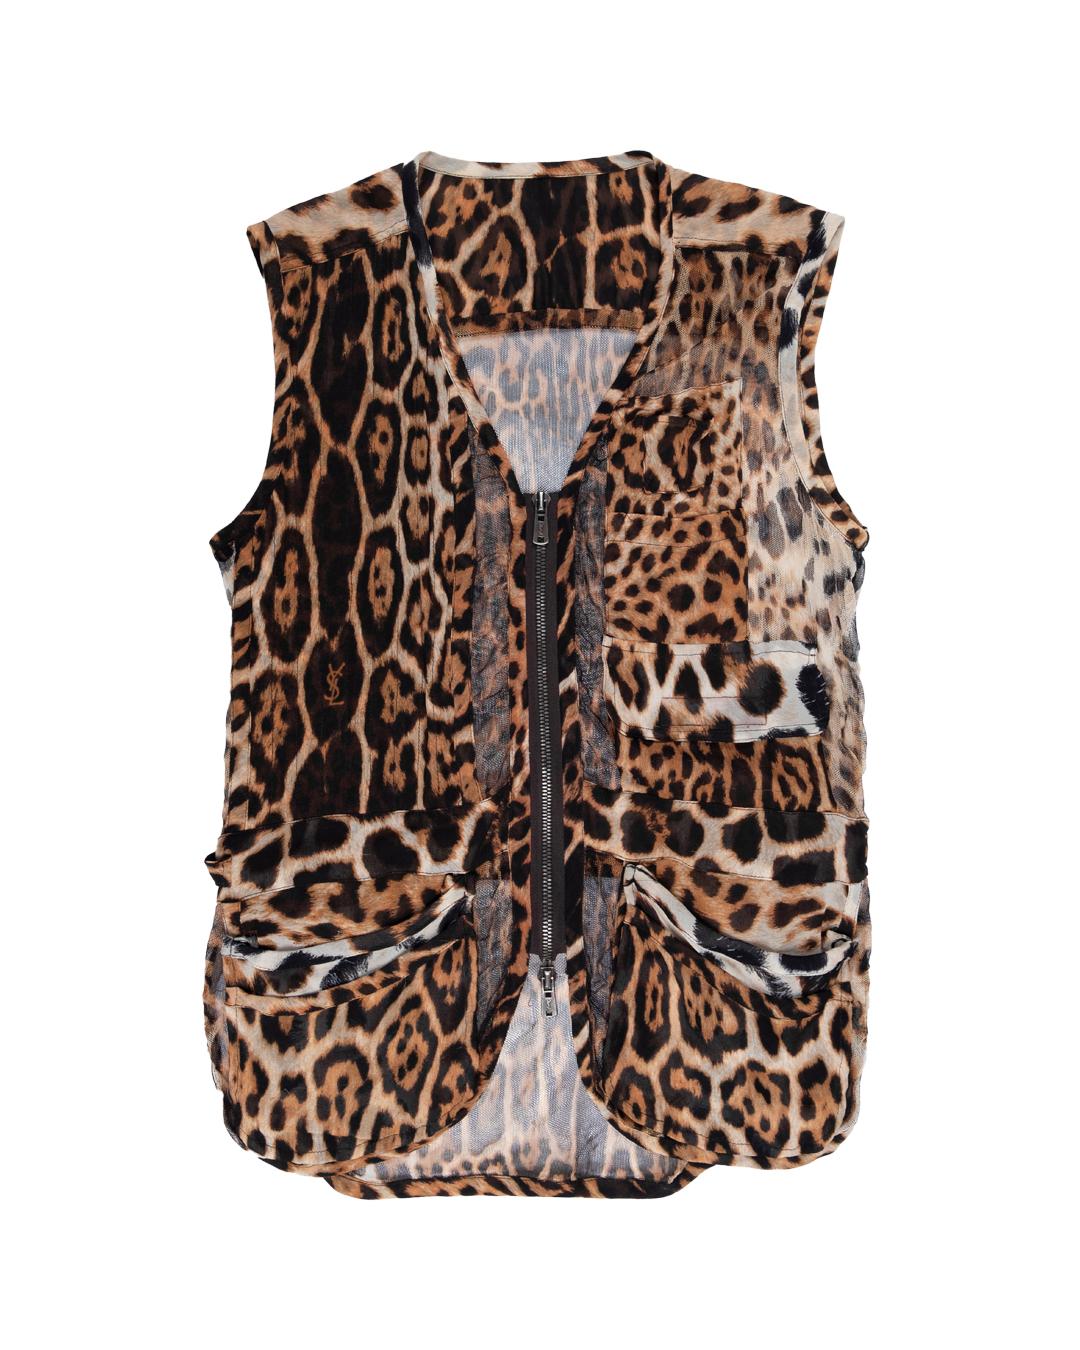 Yves Saint Laurent by Tom Ford SS2002 Silk Leopard Cargo Vest For Sale 1